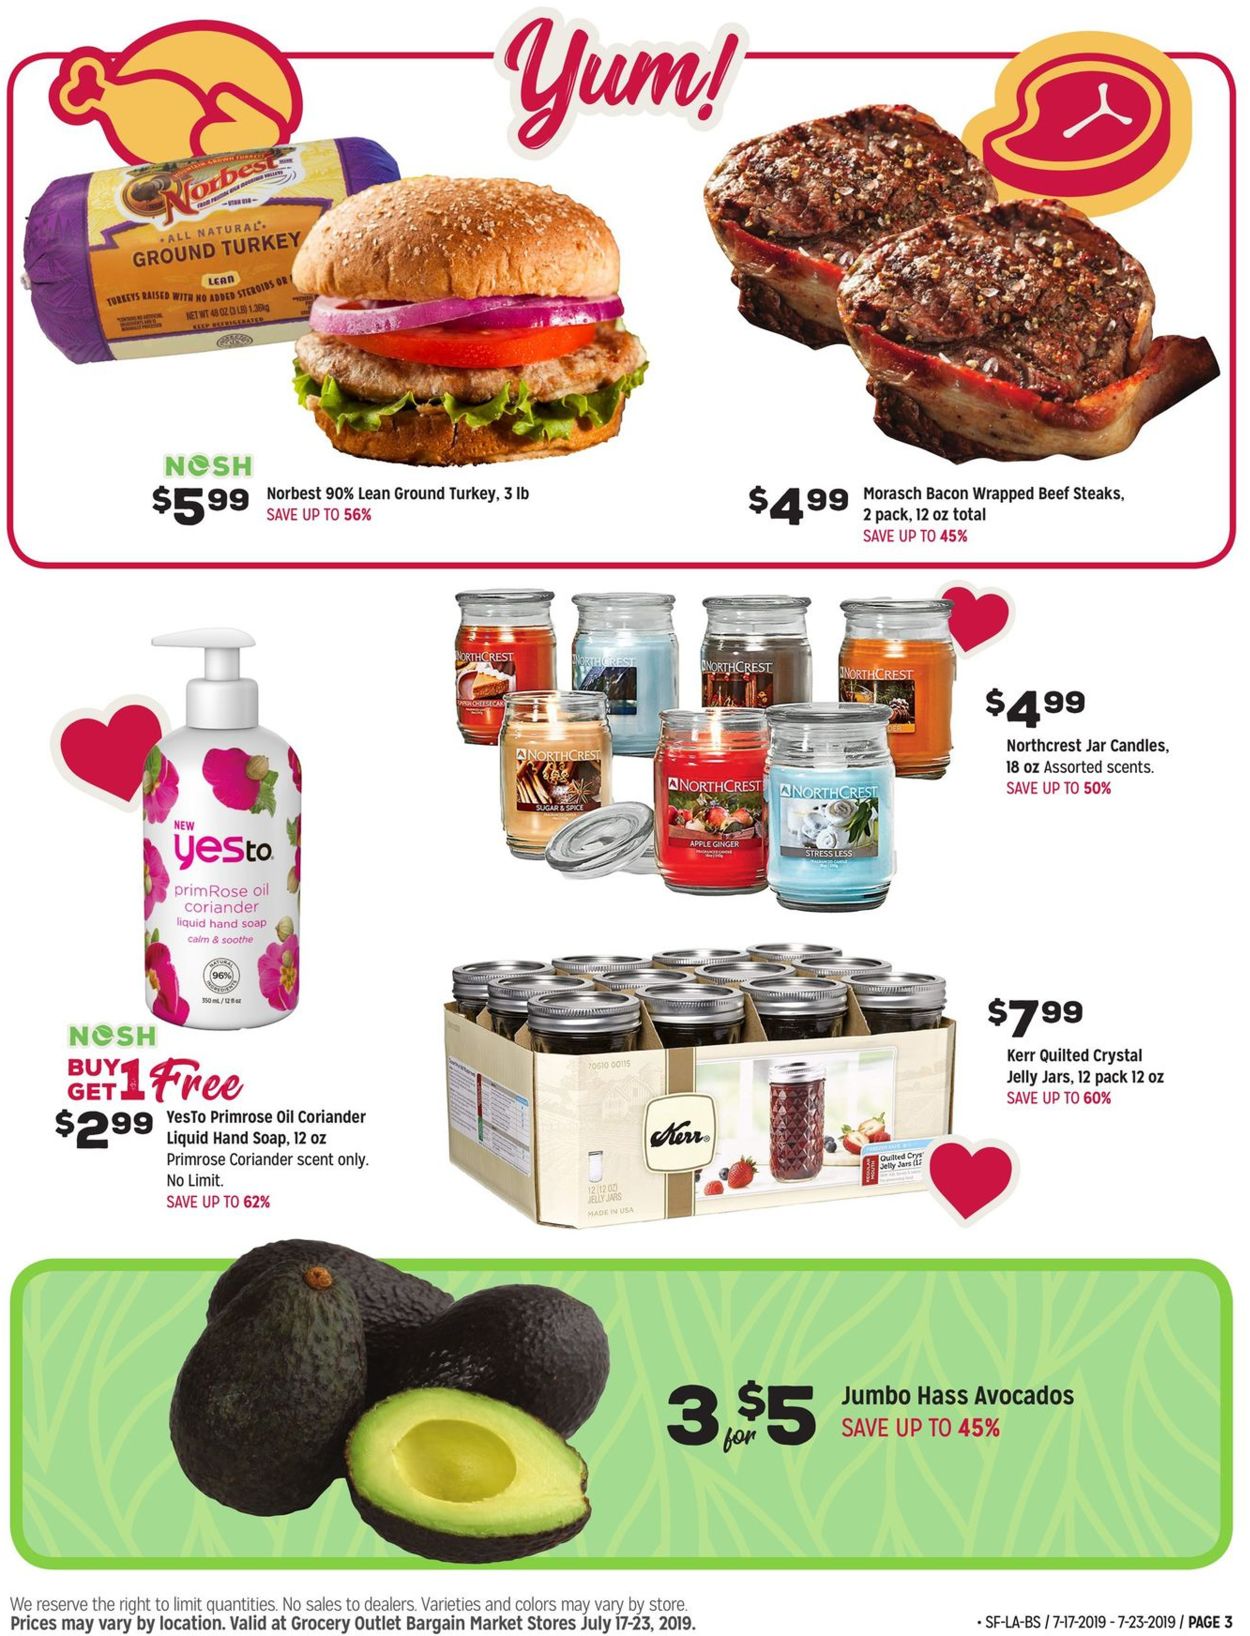 Grocery Outlet Current weekly ad 07/17 - 07/23/2019 [3 ...